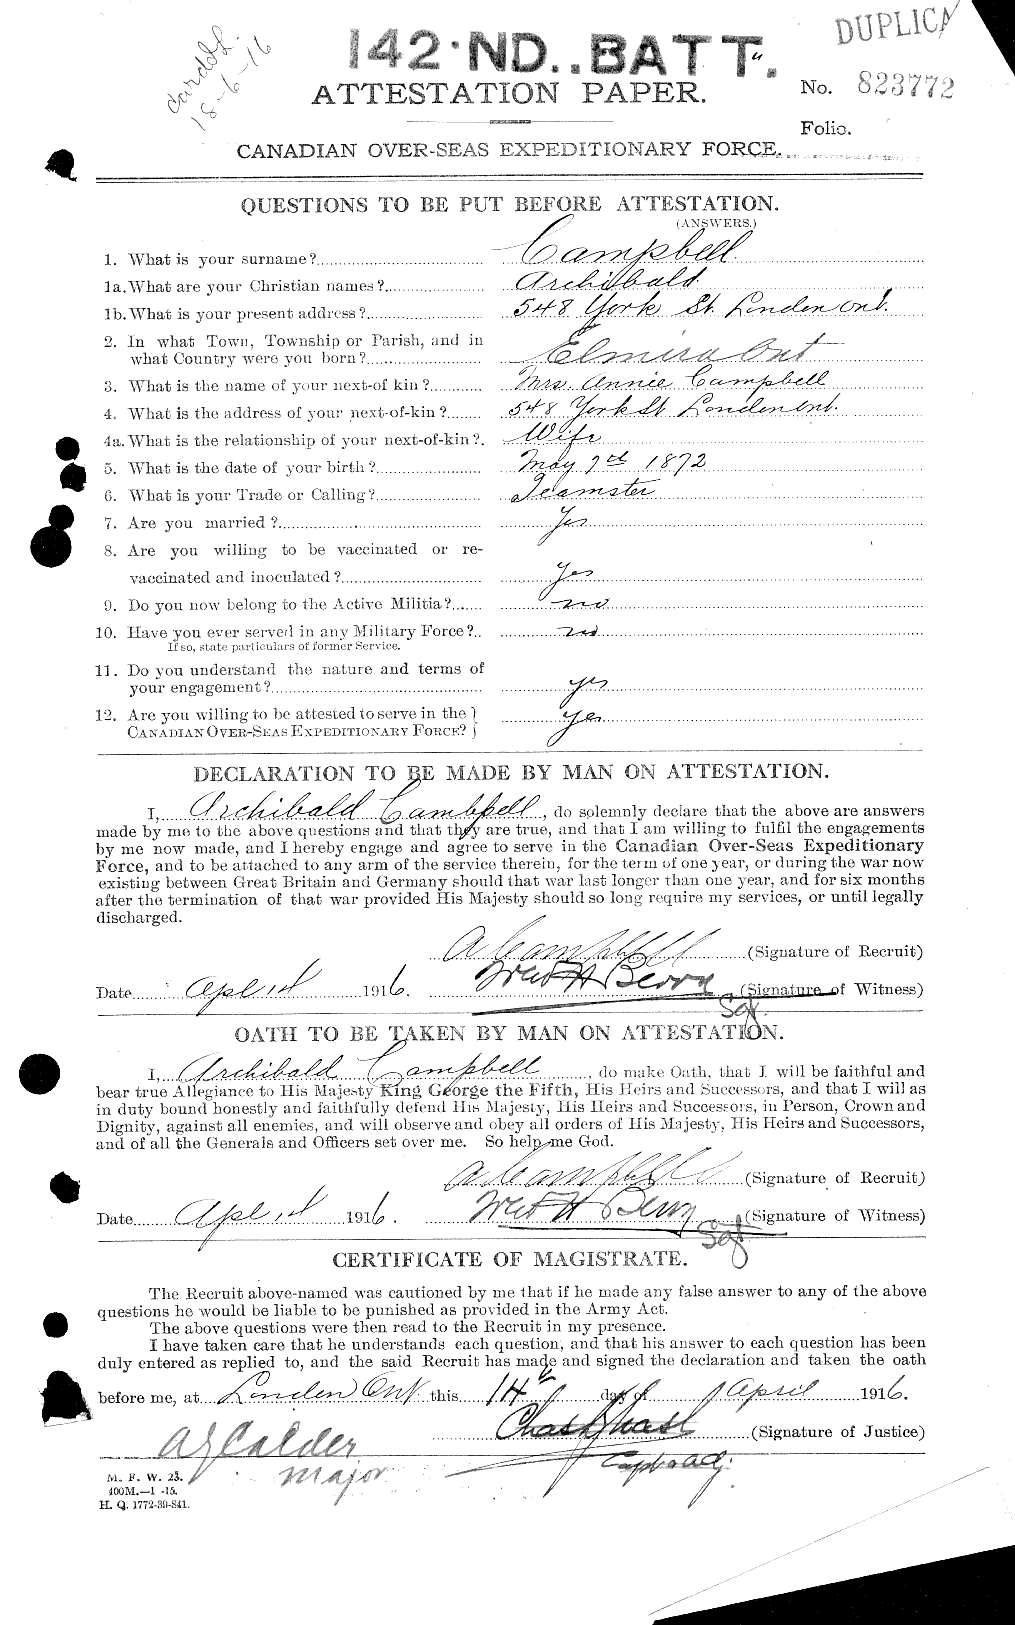 Personnel Records of the First World War - CEF 007995a